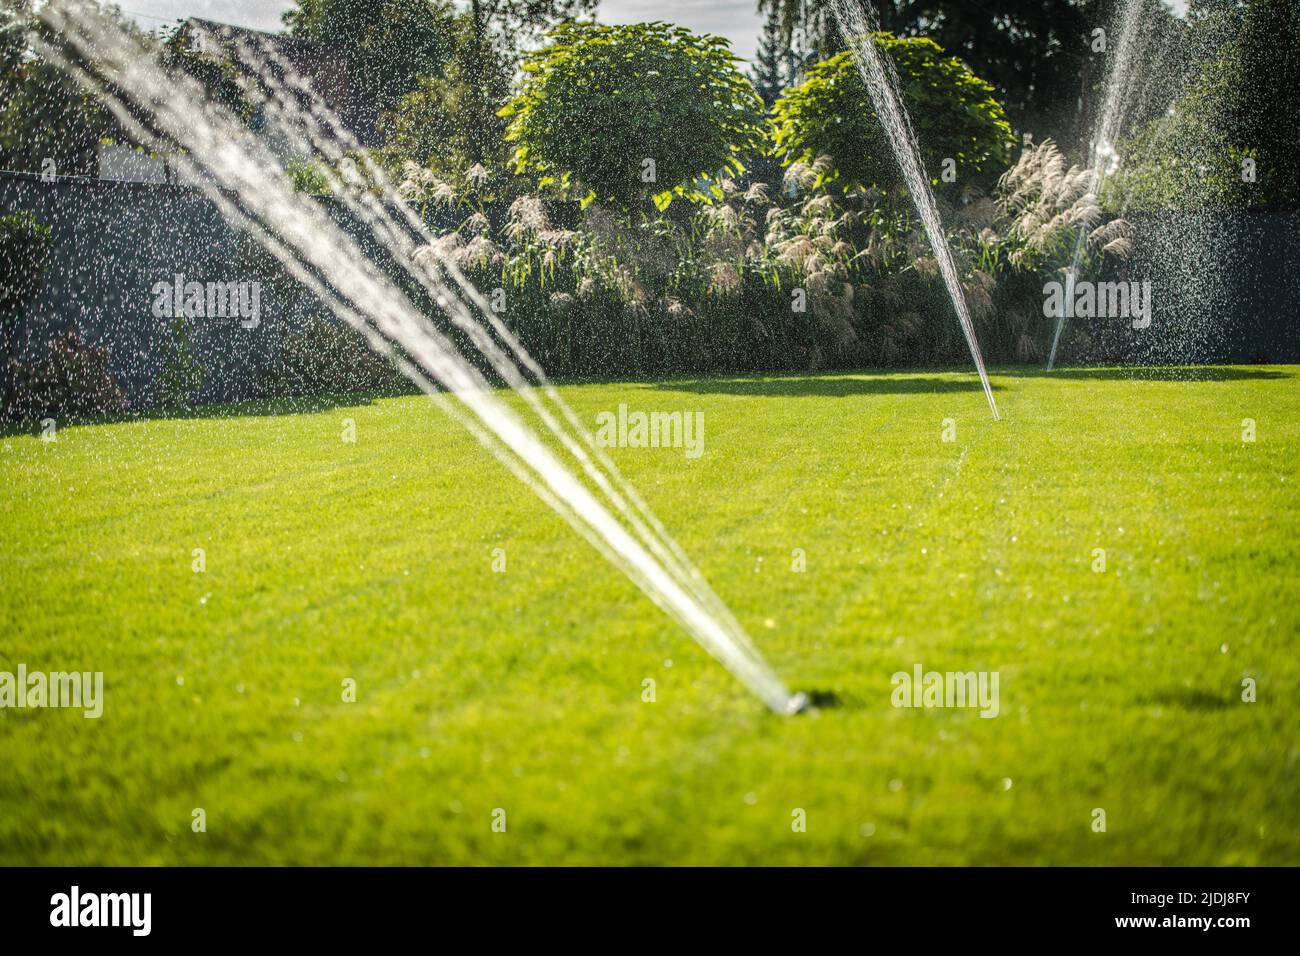 Sprinkling the Lawn with Automatic Garden Watering System. Taking Care of Grass During Hot Summer Days Using Dedicated Equipment for Garden Maintenanc Stock Photo